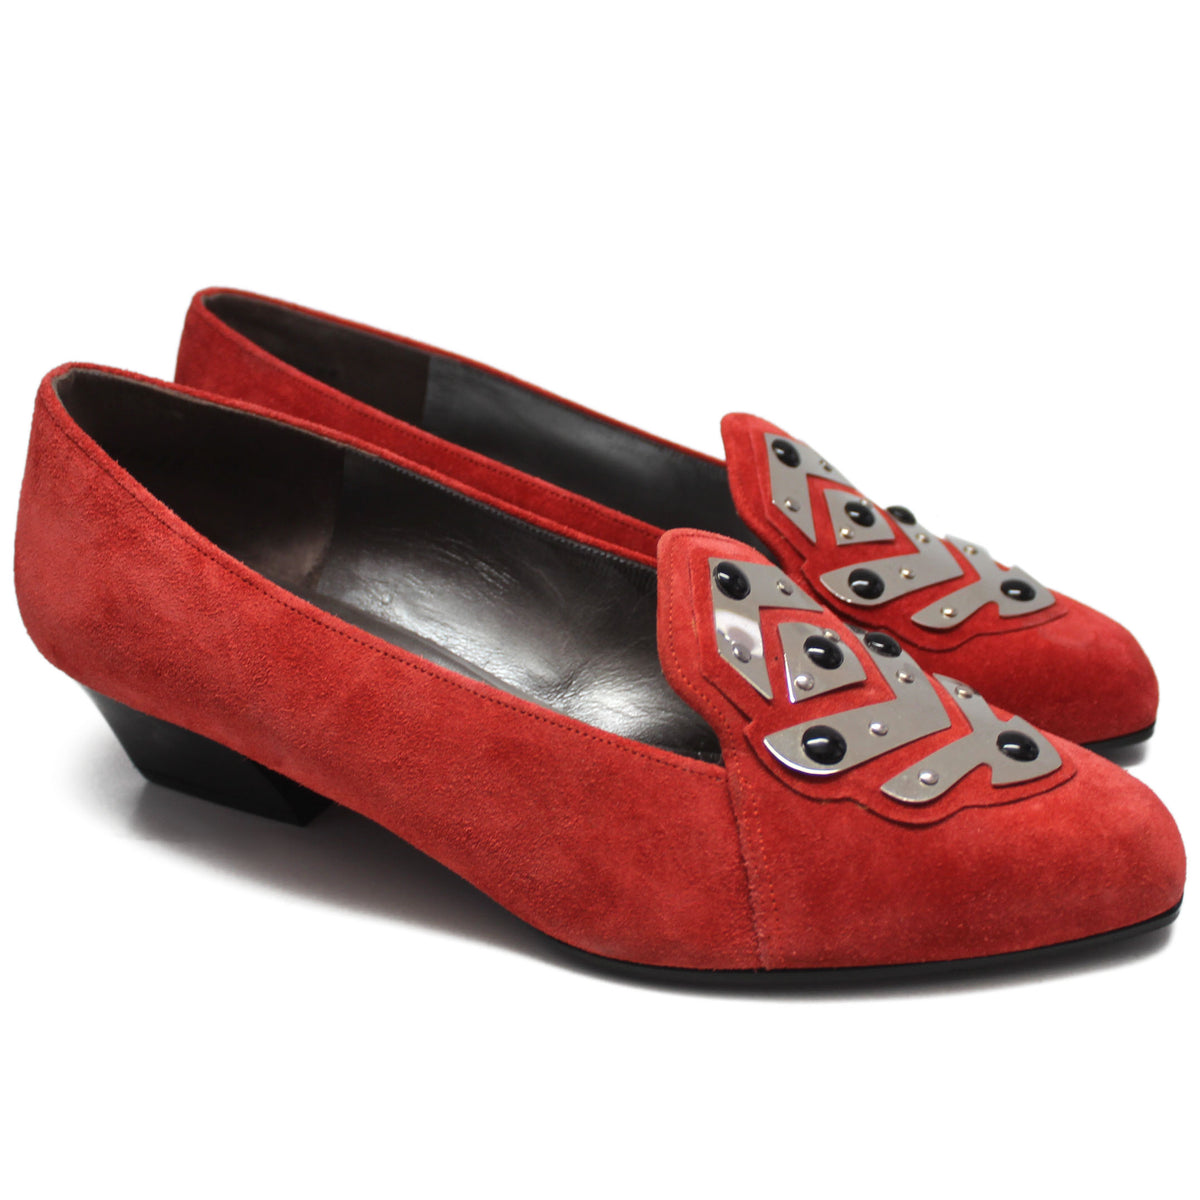 red suede shoes